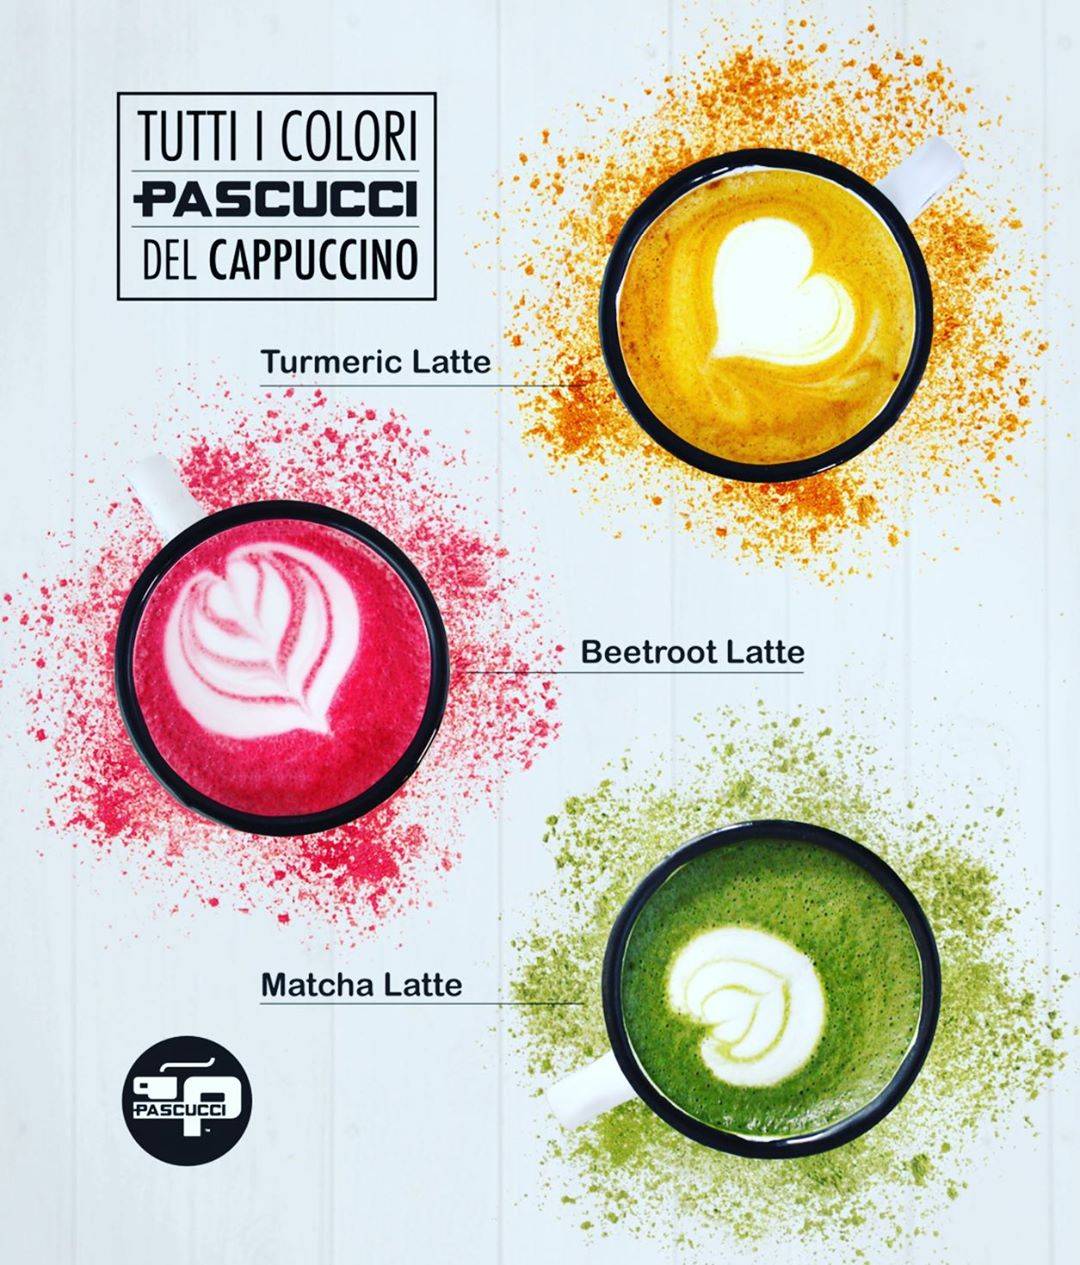 Colors of cappuccino